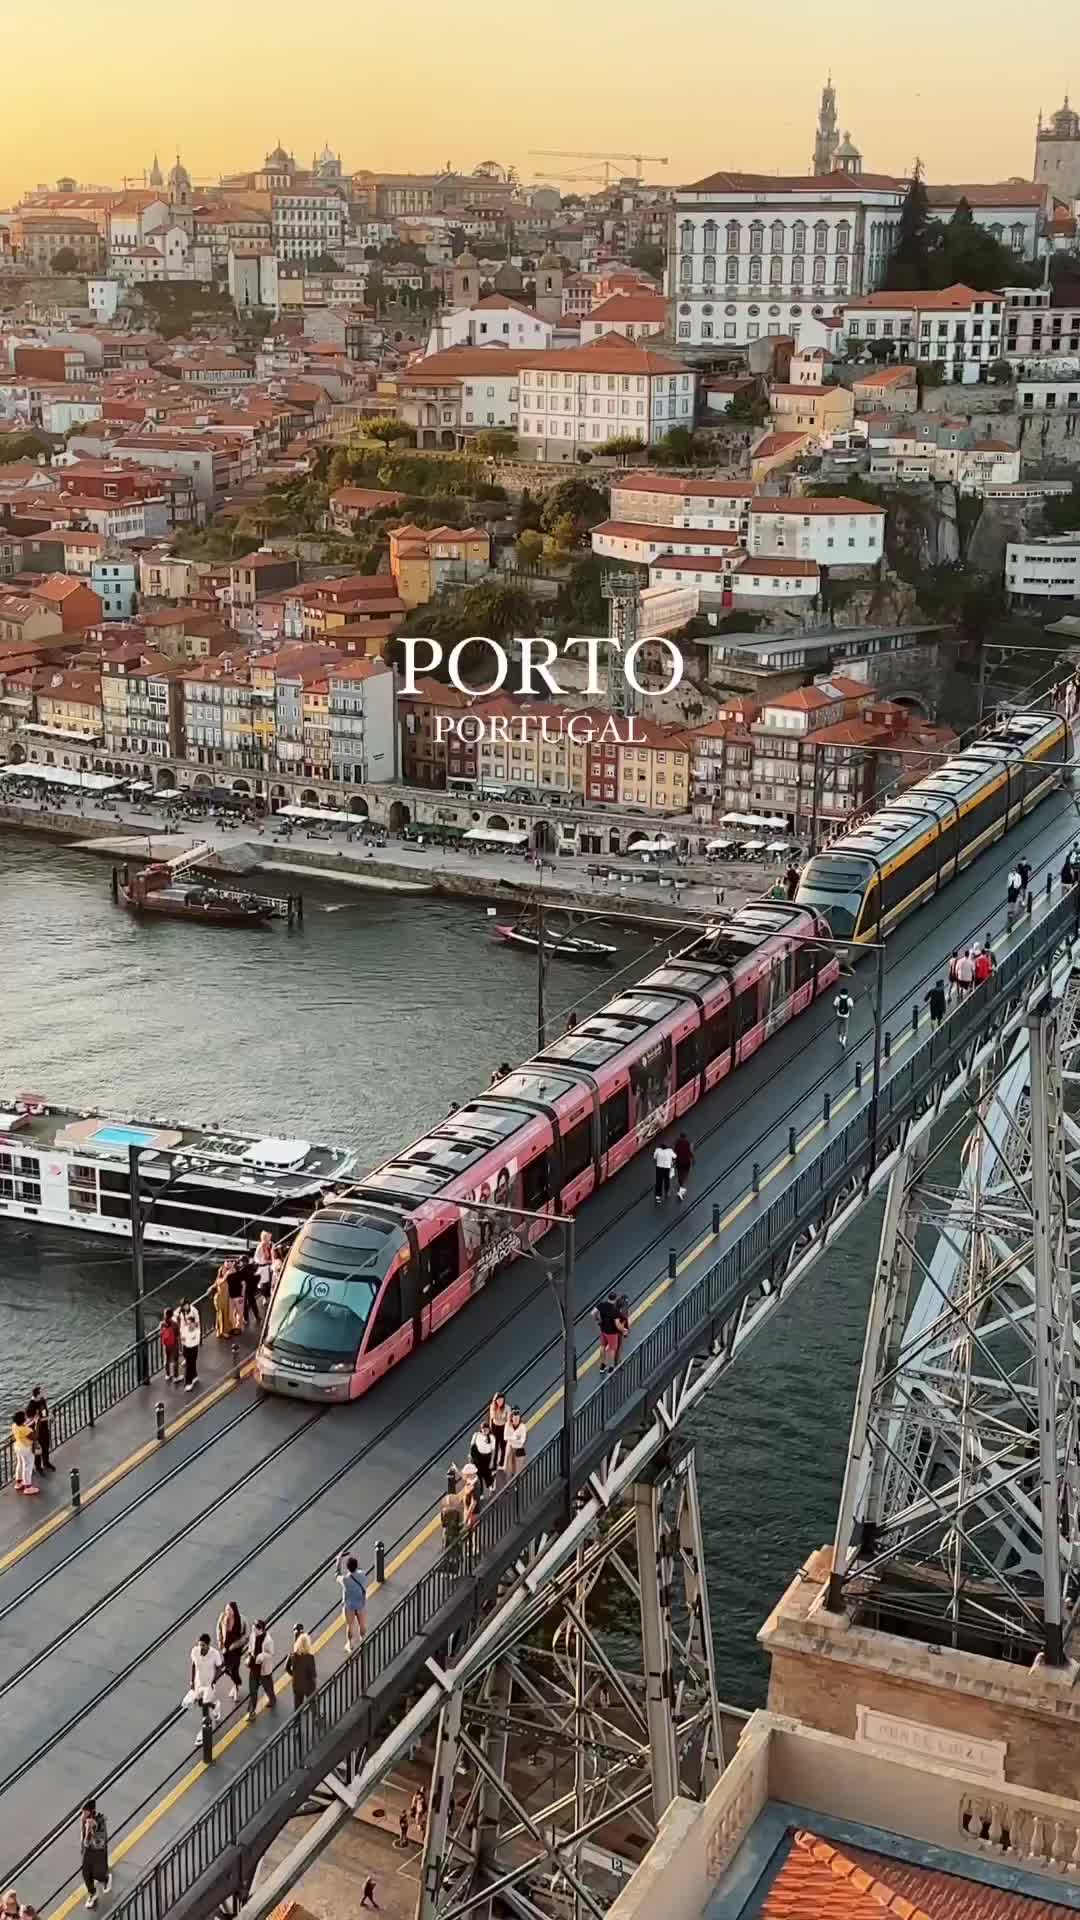 Discover Porto in 3 Days with Mercure Hotels